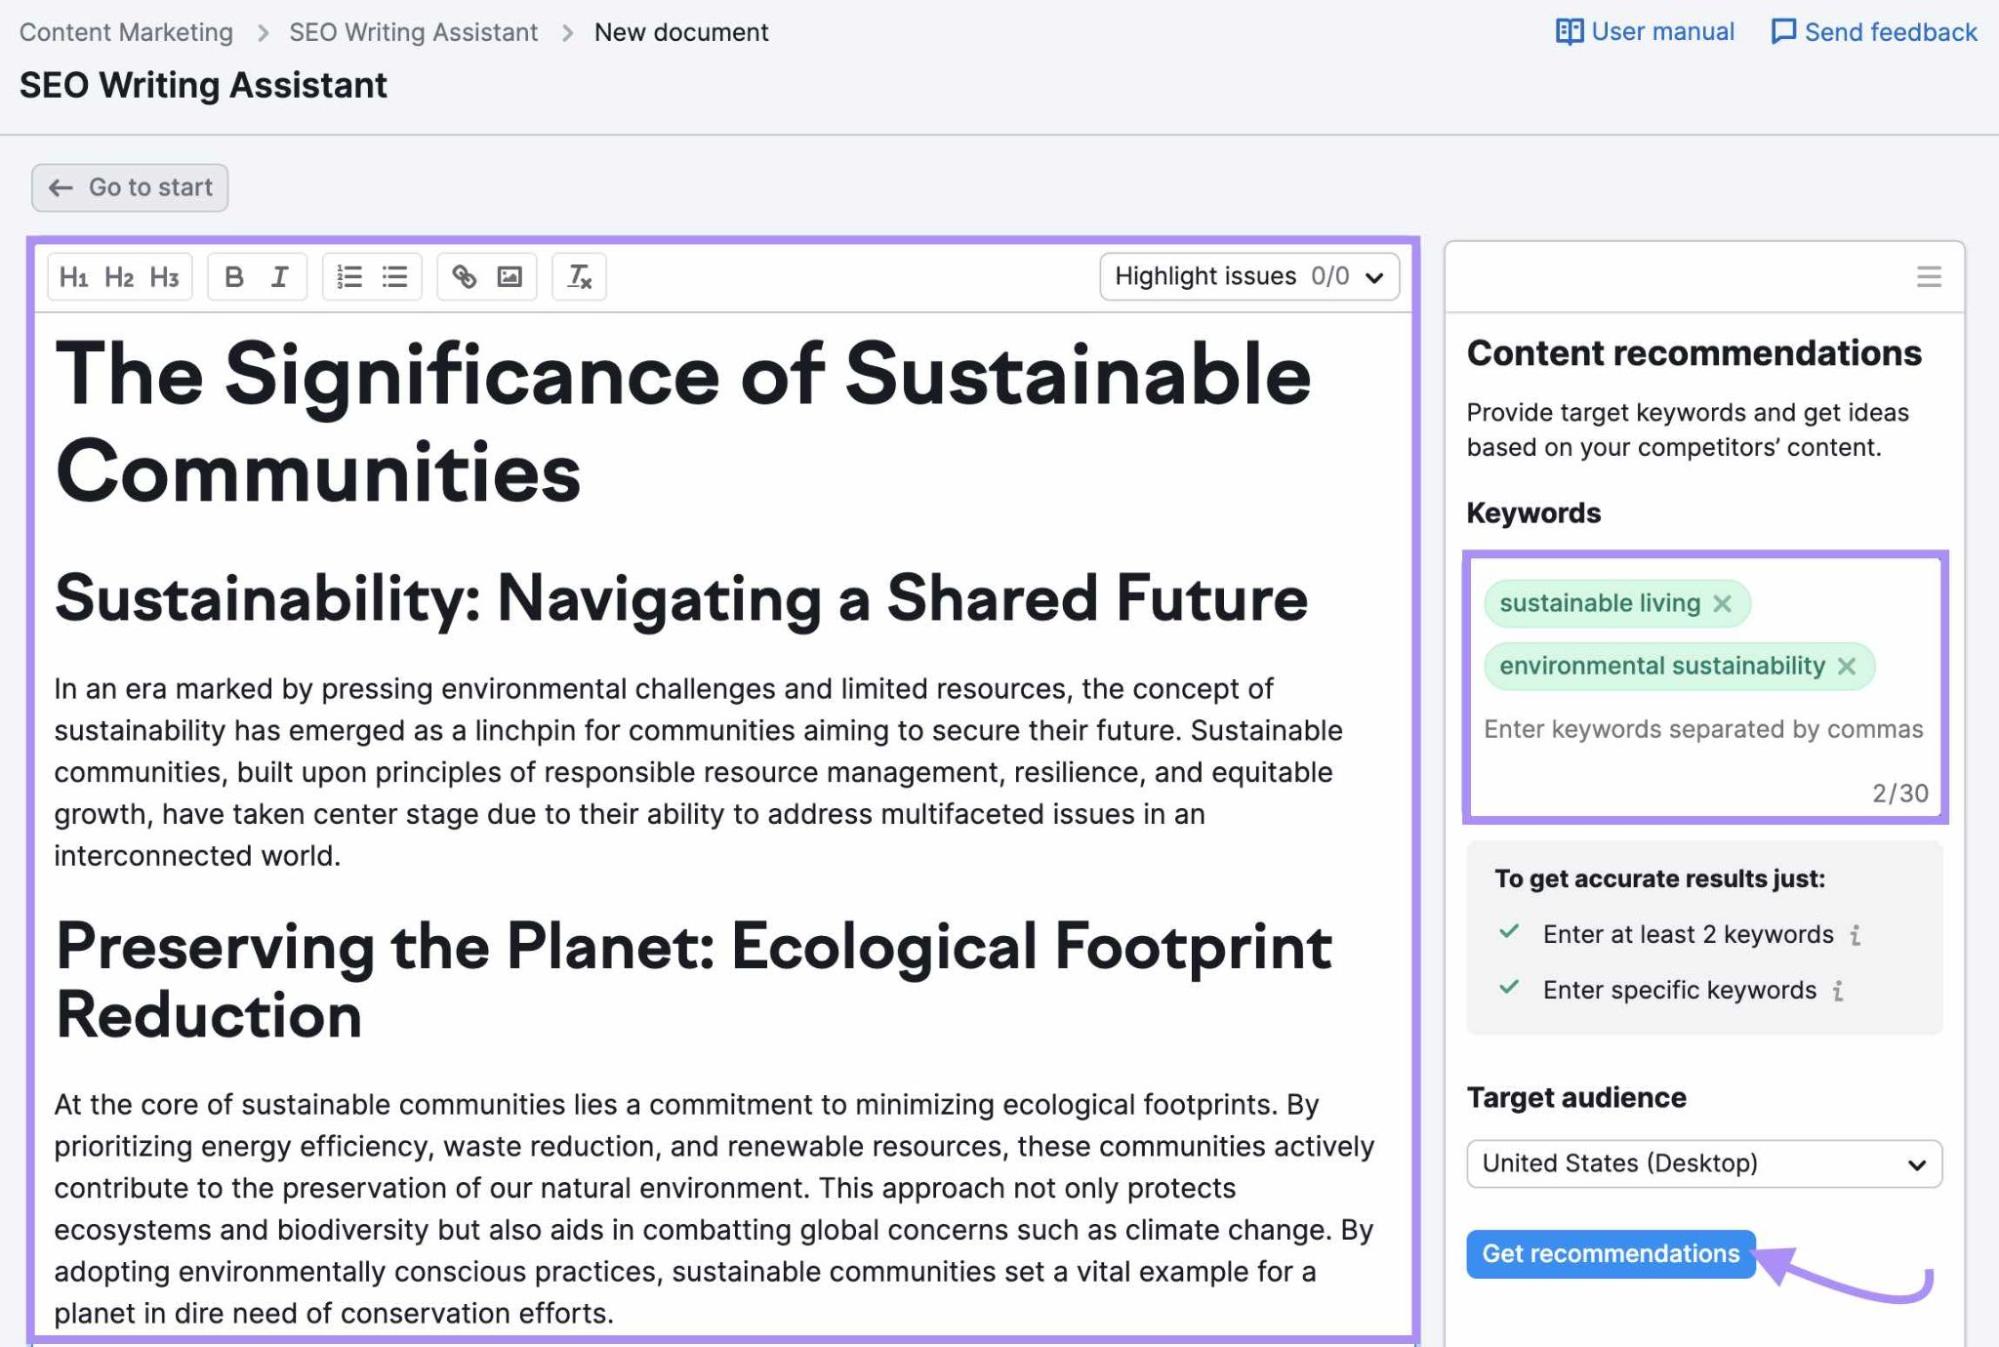 "The Significance of Sustainable Communities" texted entered into SEO Writing Assistant text editor